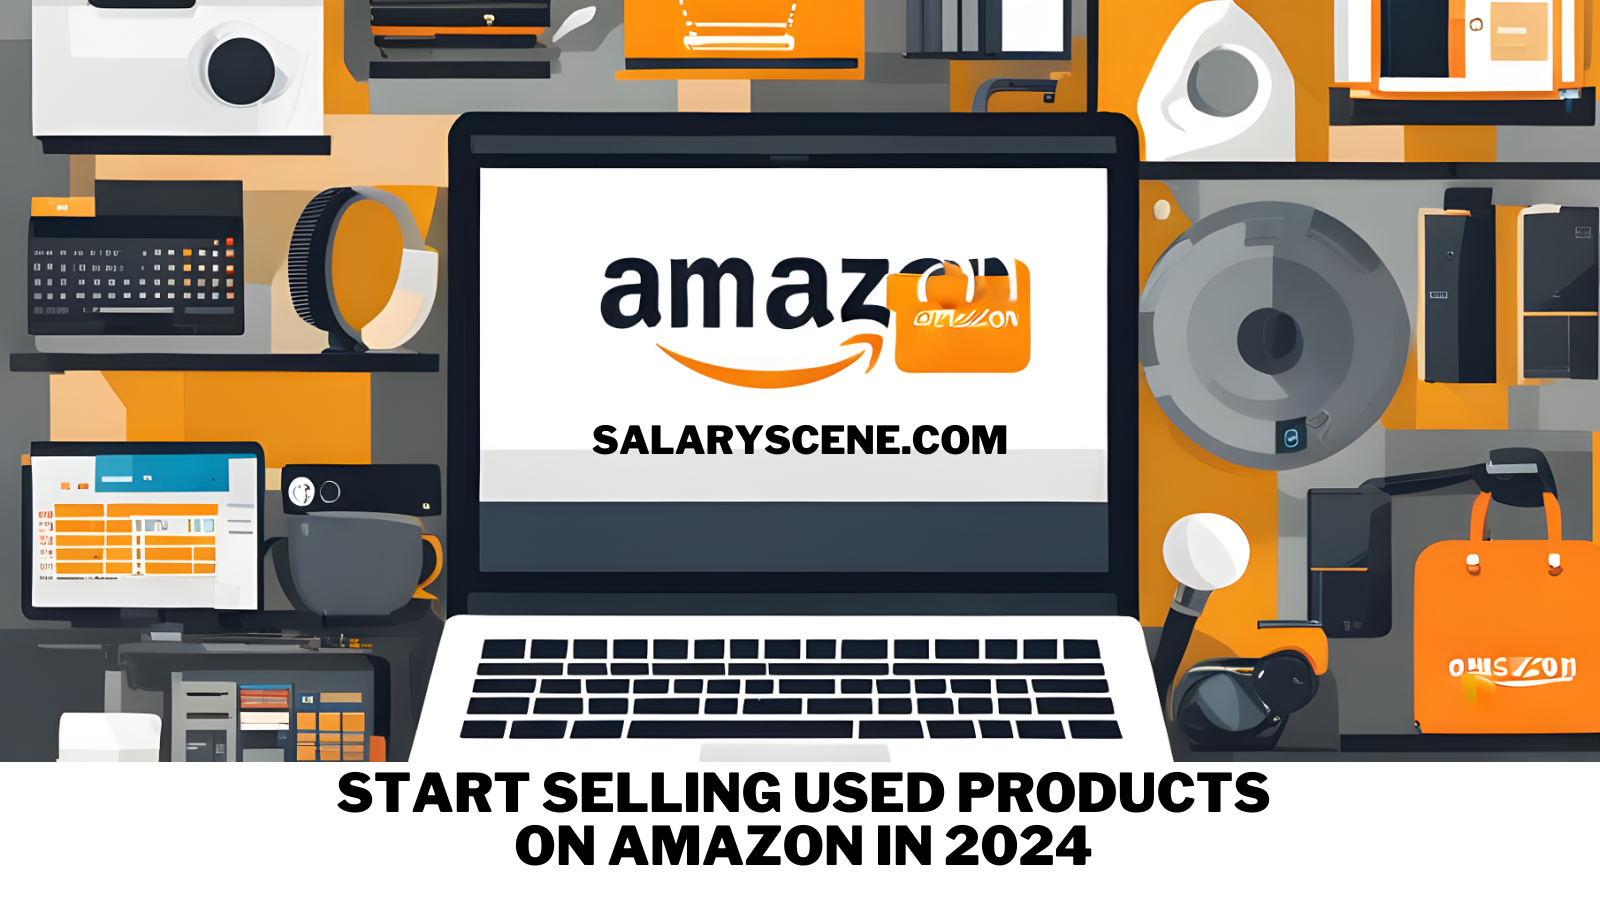 Start Selling Used Products on Amazon in 2024